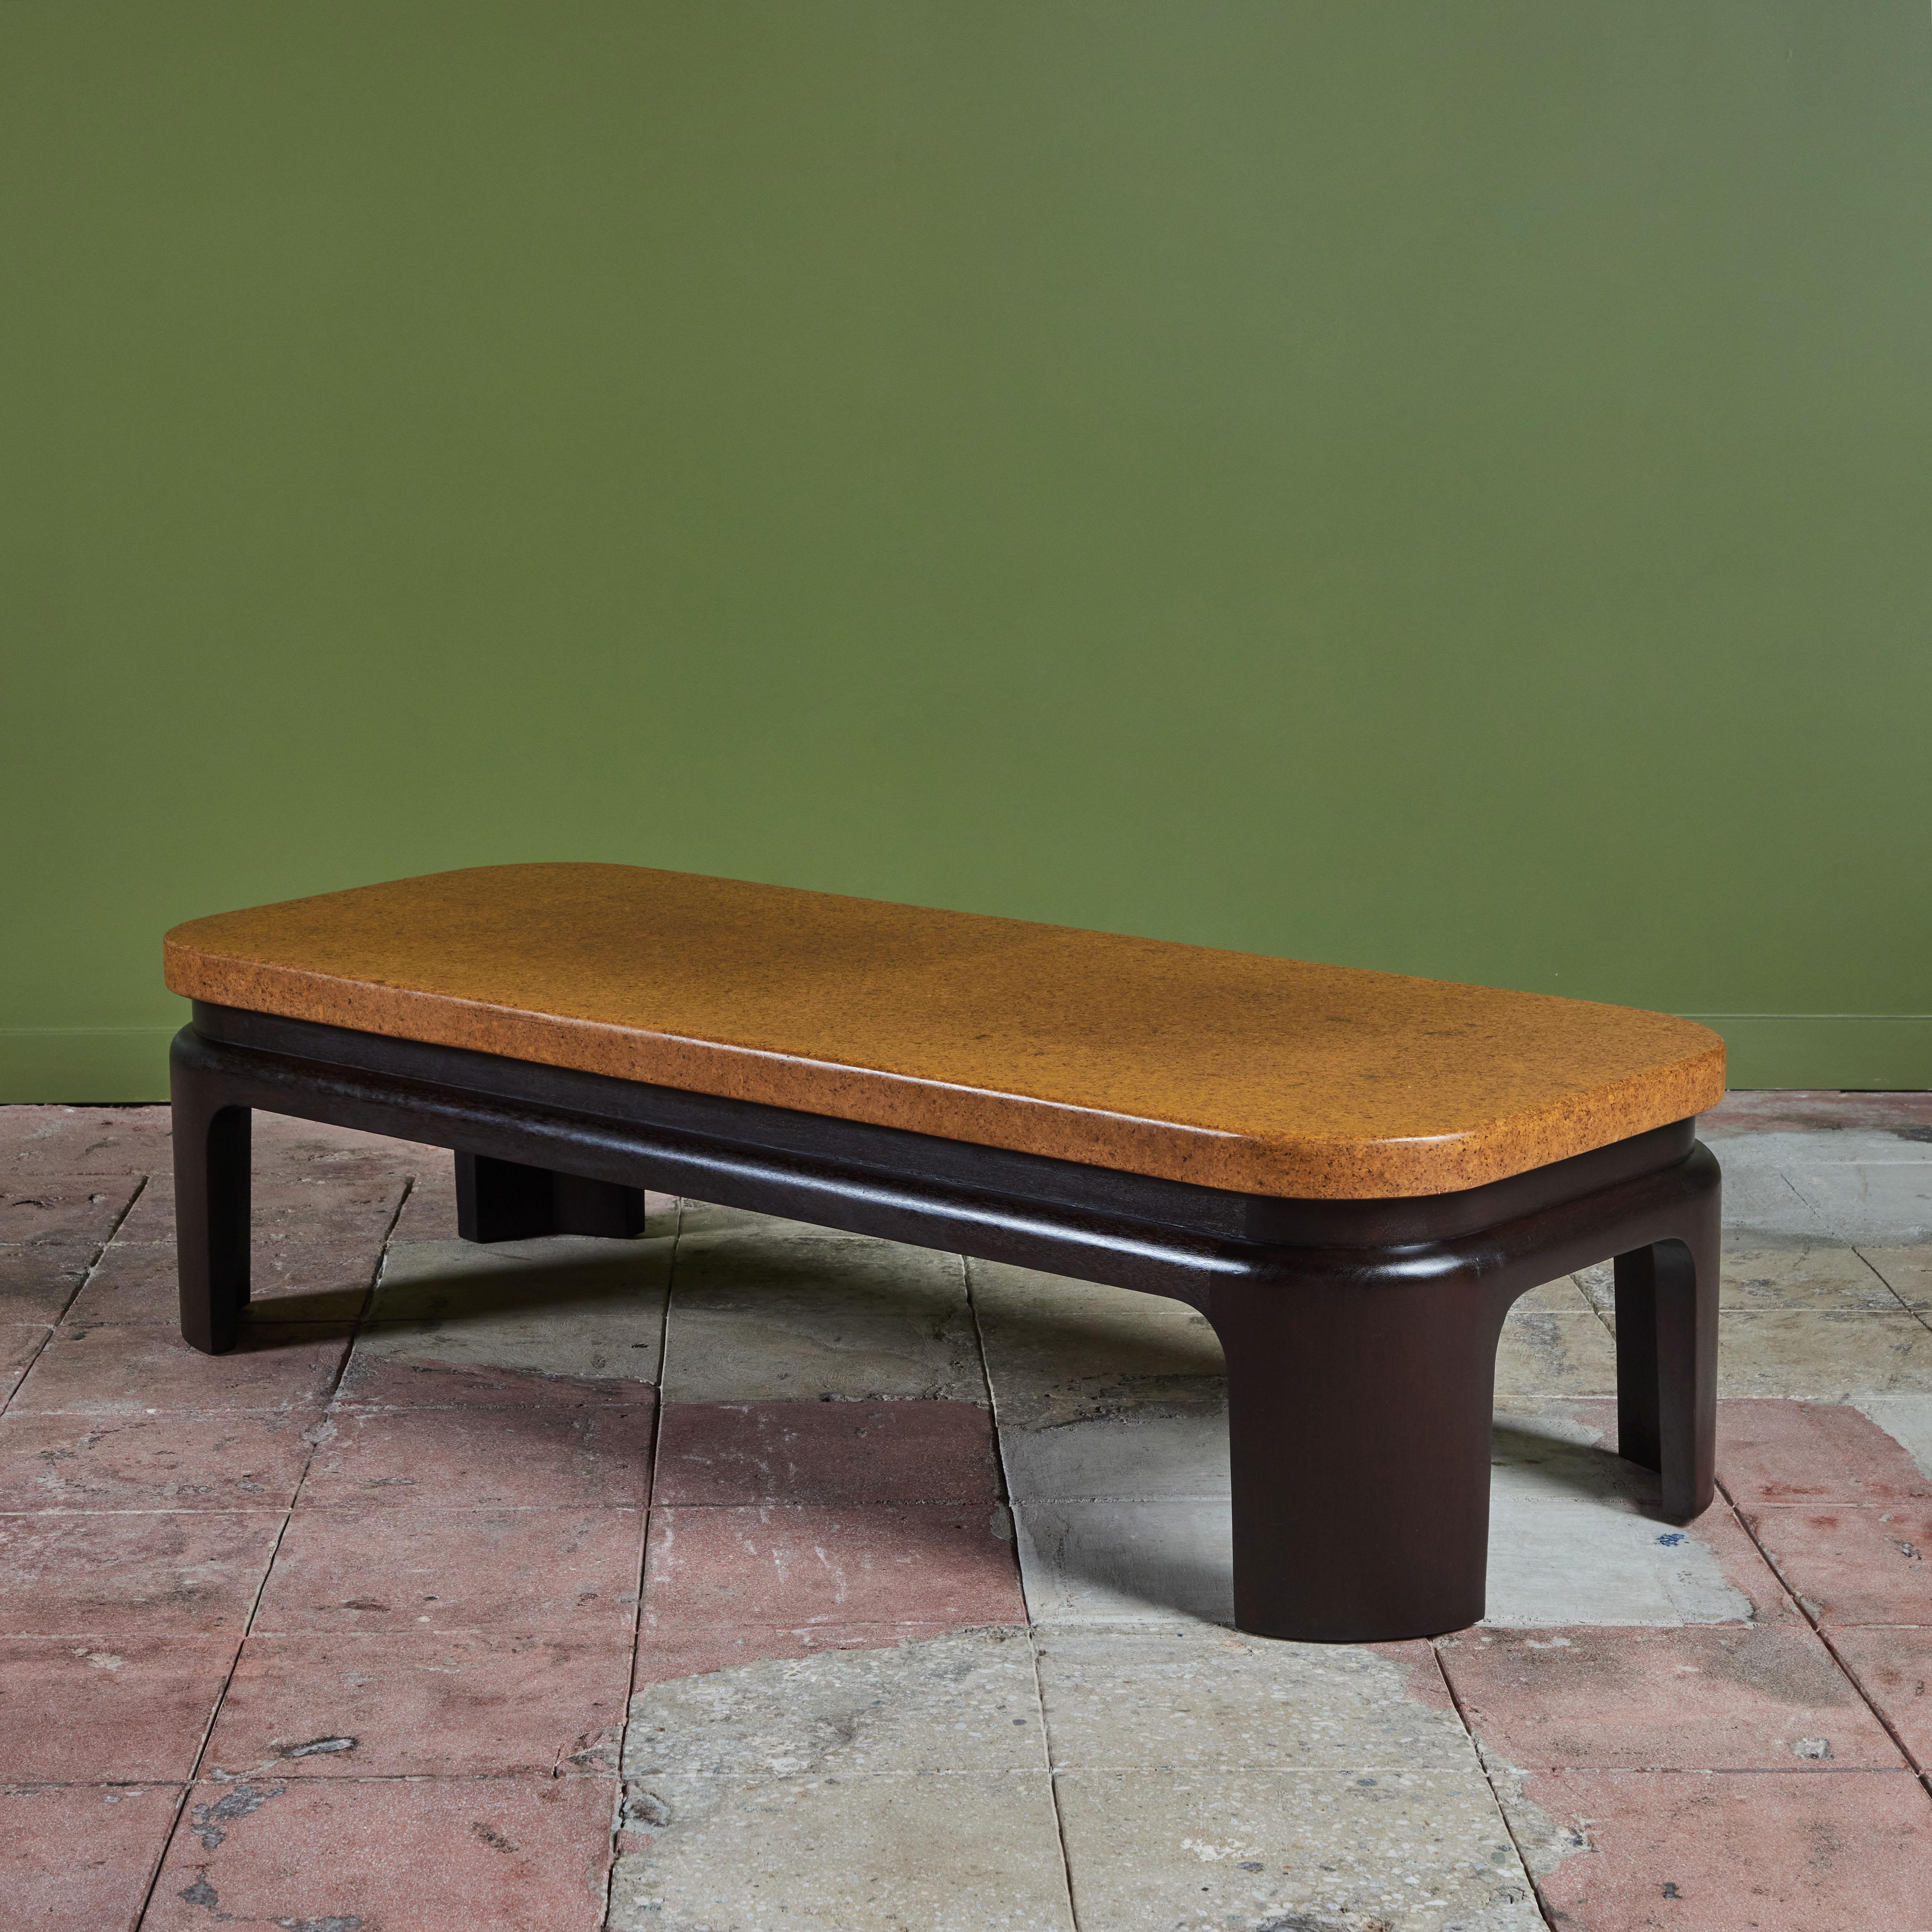 Paul Frankl’s cork furniture pieces are among his longest-lasting contributions to American modernism and are highly sought after to this day. This rare example cork top coffee table designed for and produced by Johnson Furniture Co has gone through